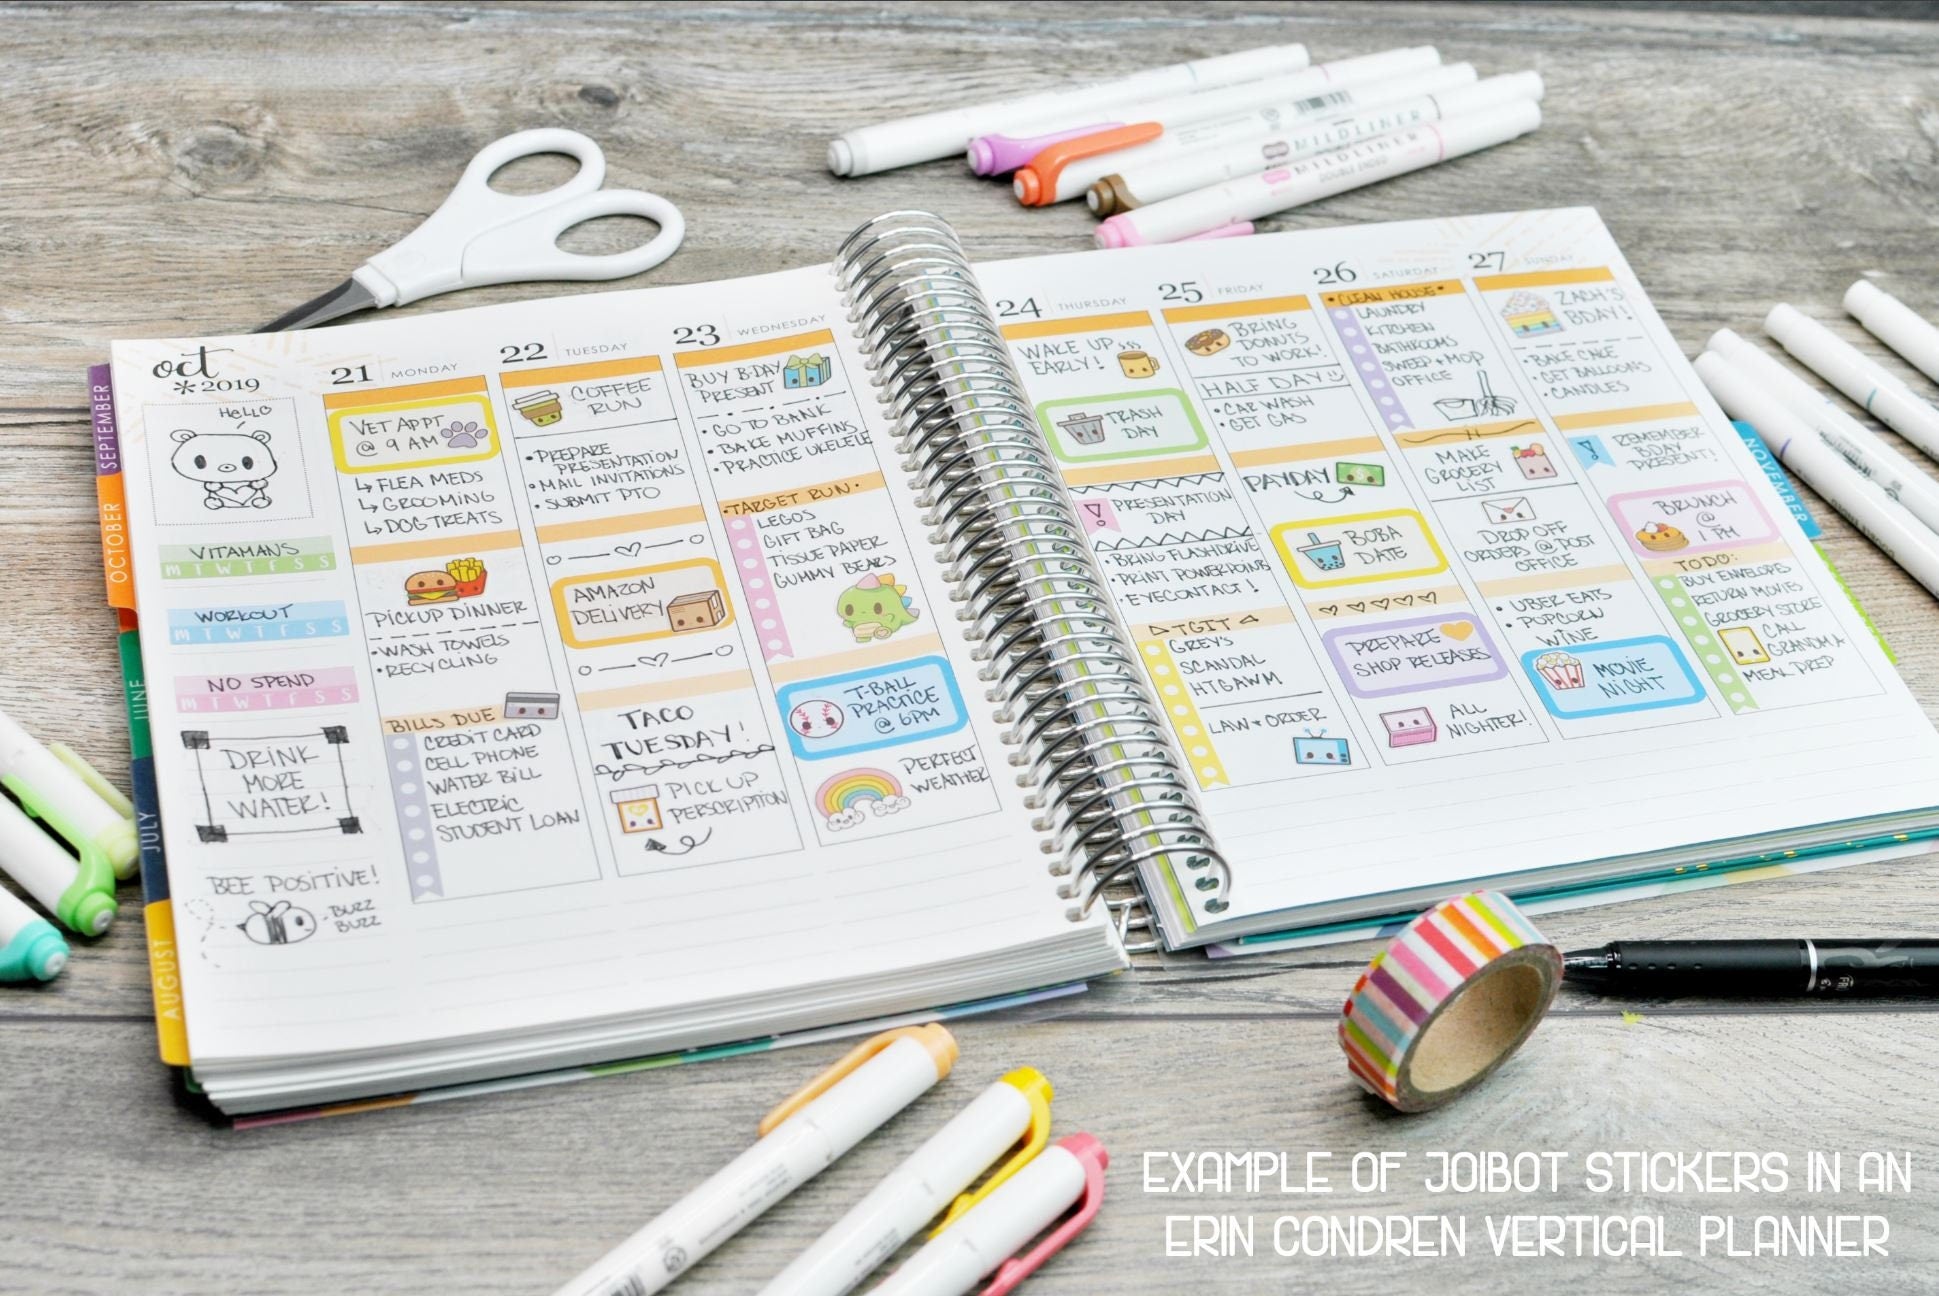 DOODLE CLUB - Kawaii Planner Stickers - Doodle Club Stickers - Journal Stickers - Cute Stickers - Decorative Stickers - Z0001